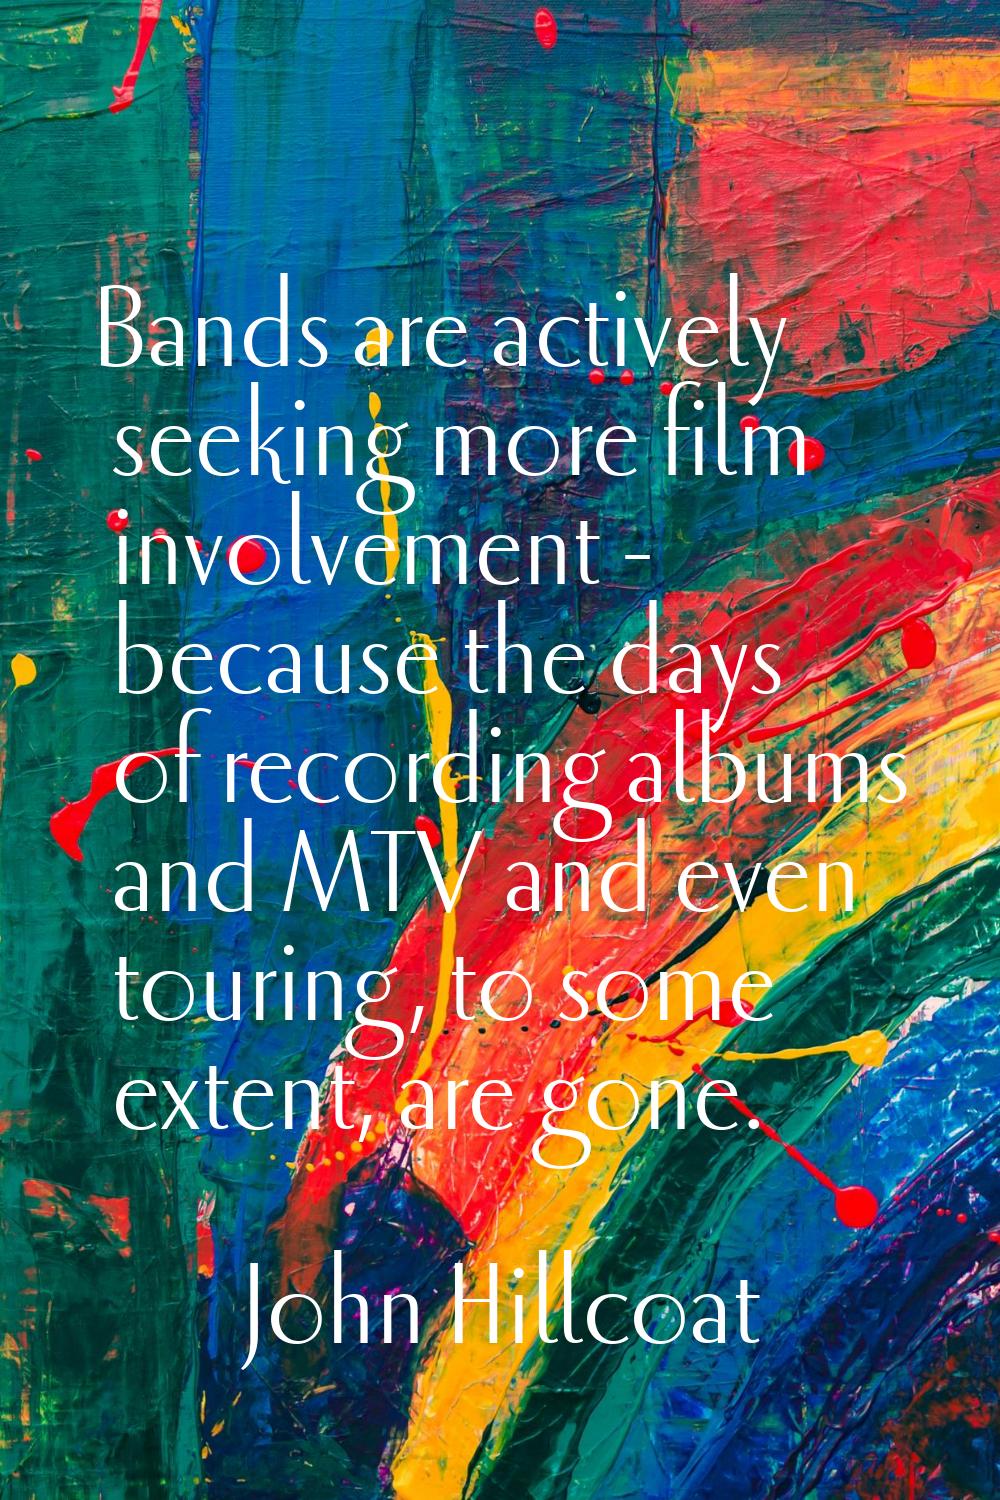 Bands are actively seeking more film involvement - because the days of recording albums and MTV and